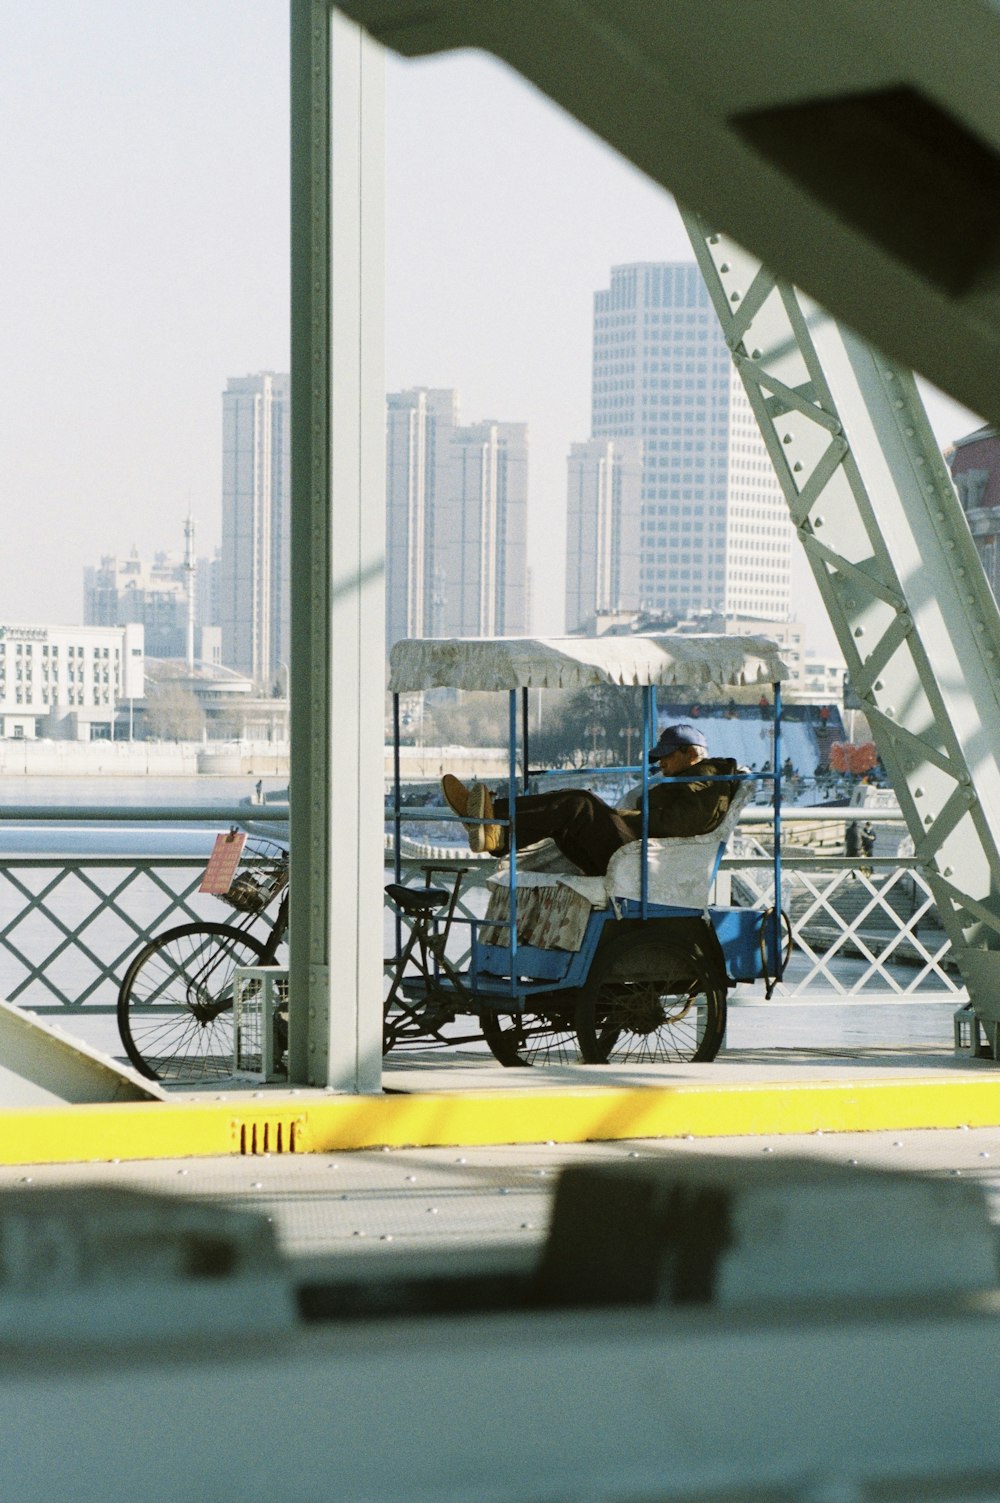 man in blue shirt riding on black and blue trike during daytime